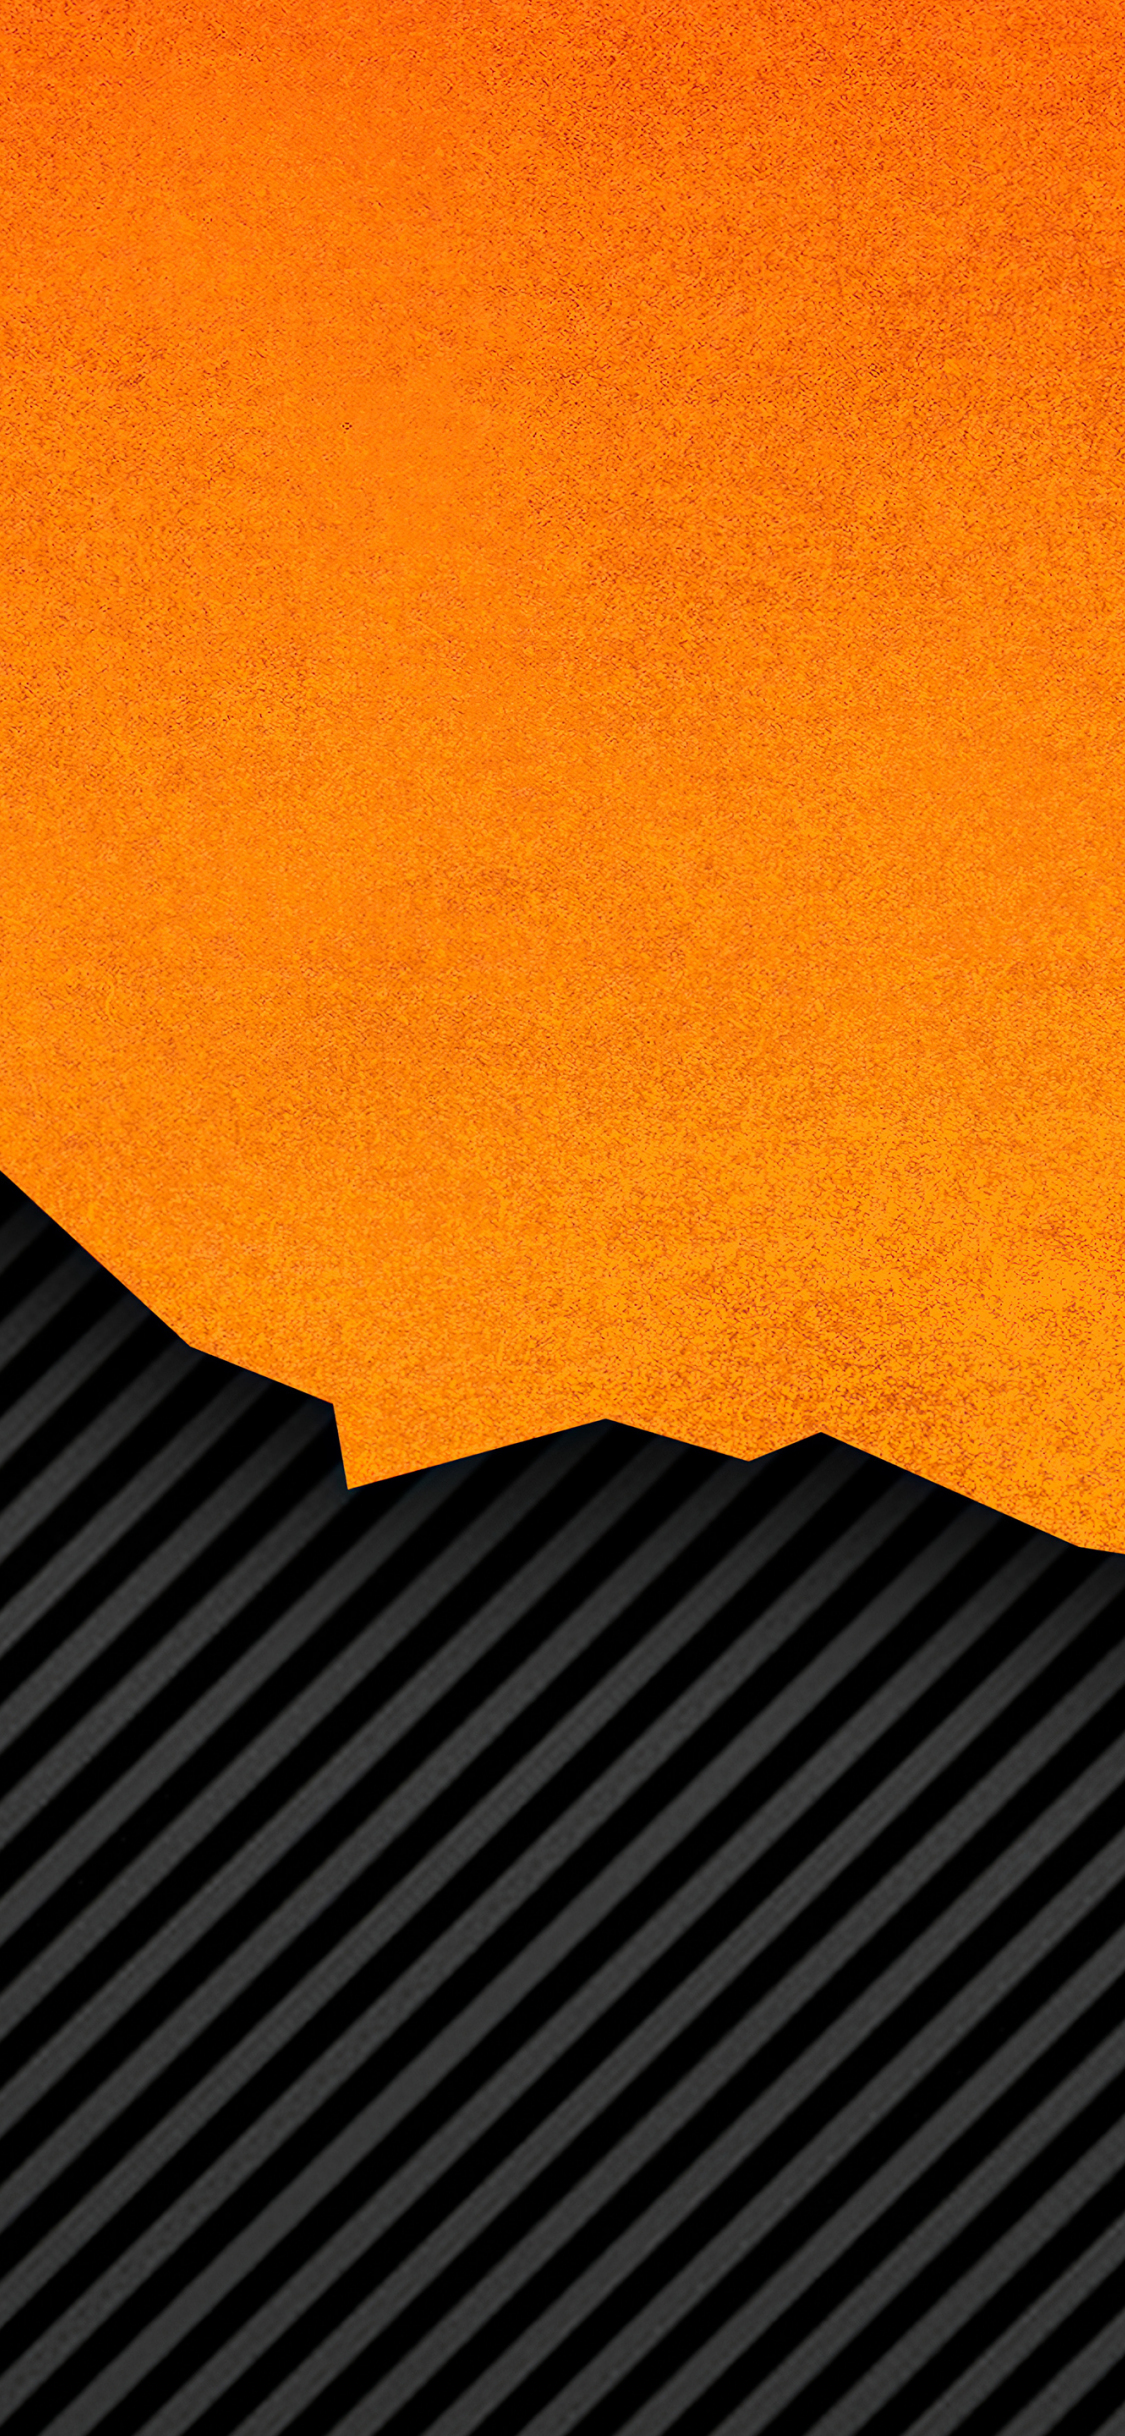 Download Orange Black Surface, Lines, Abstract 1125x2436 Wallpaper, Iphone X, 1125x2436 HD Image, Background, 26743